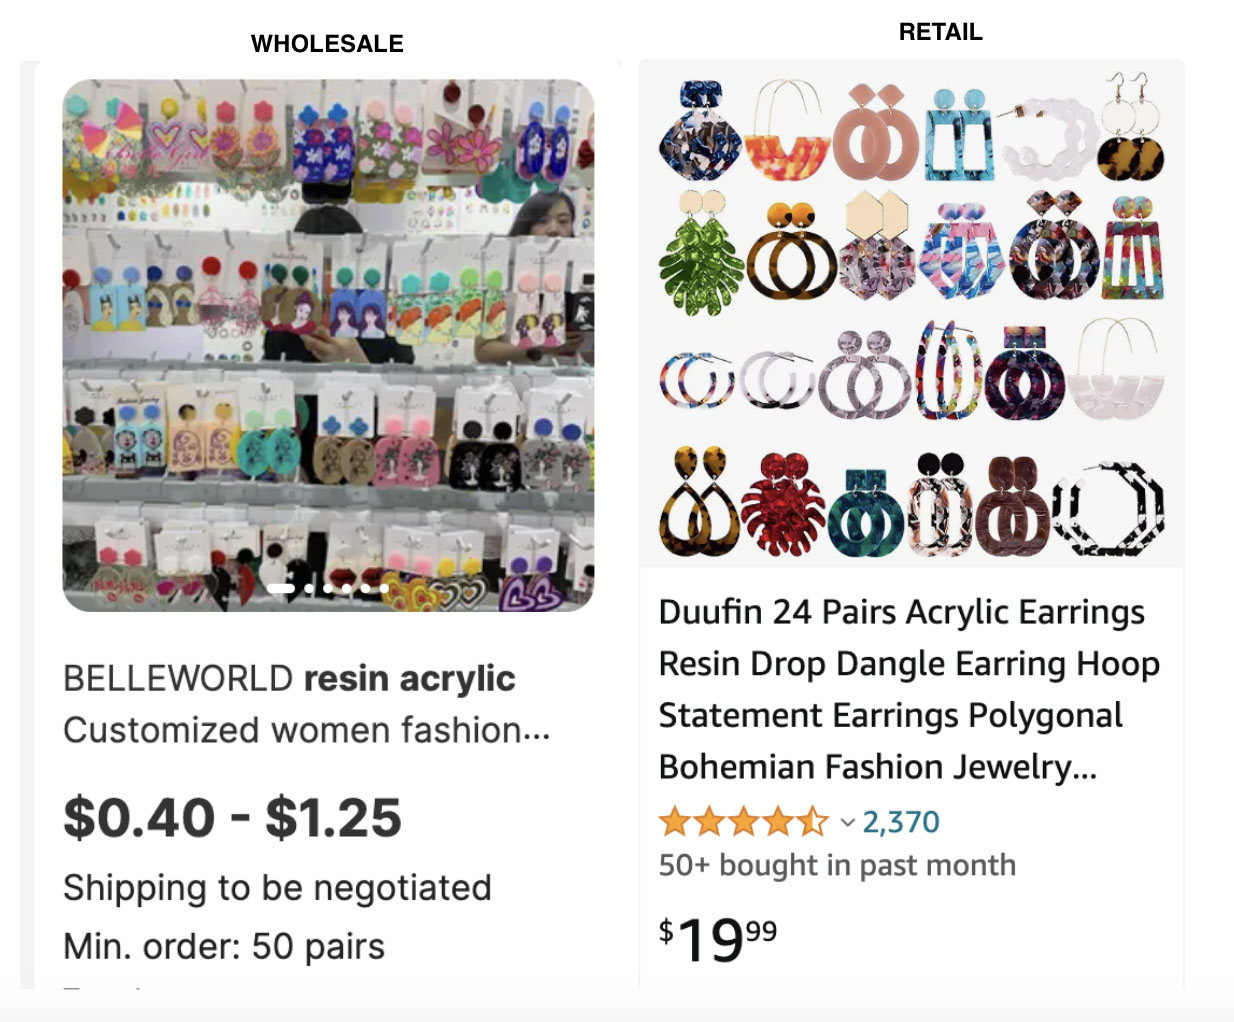 Fashion earrings wholesale Alibaba pricing retail Amazon pricing.